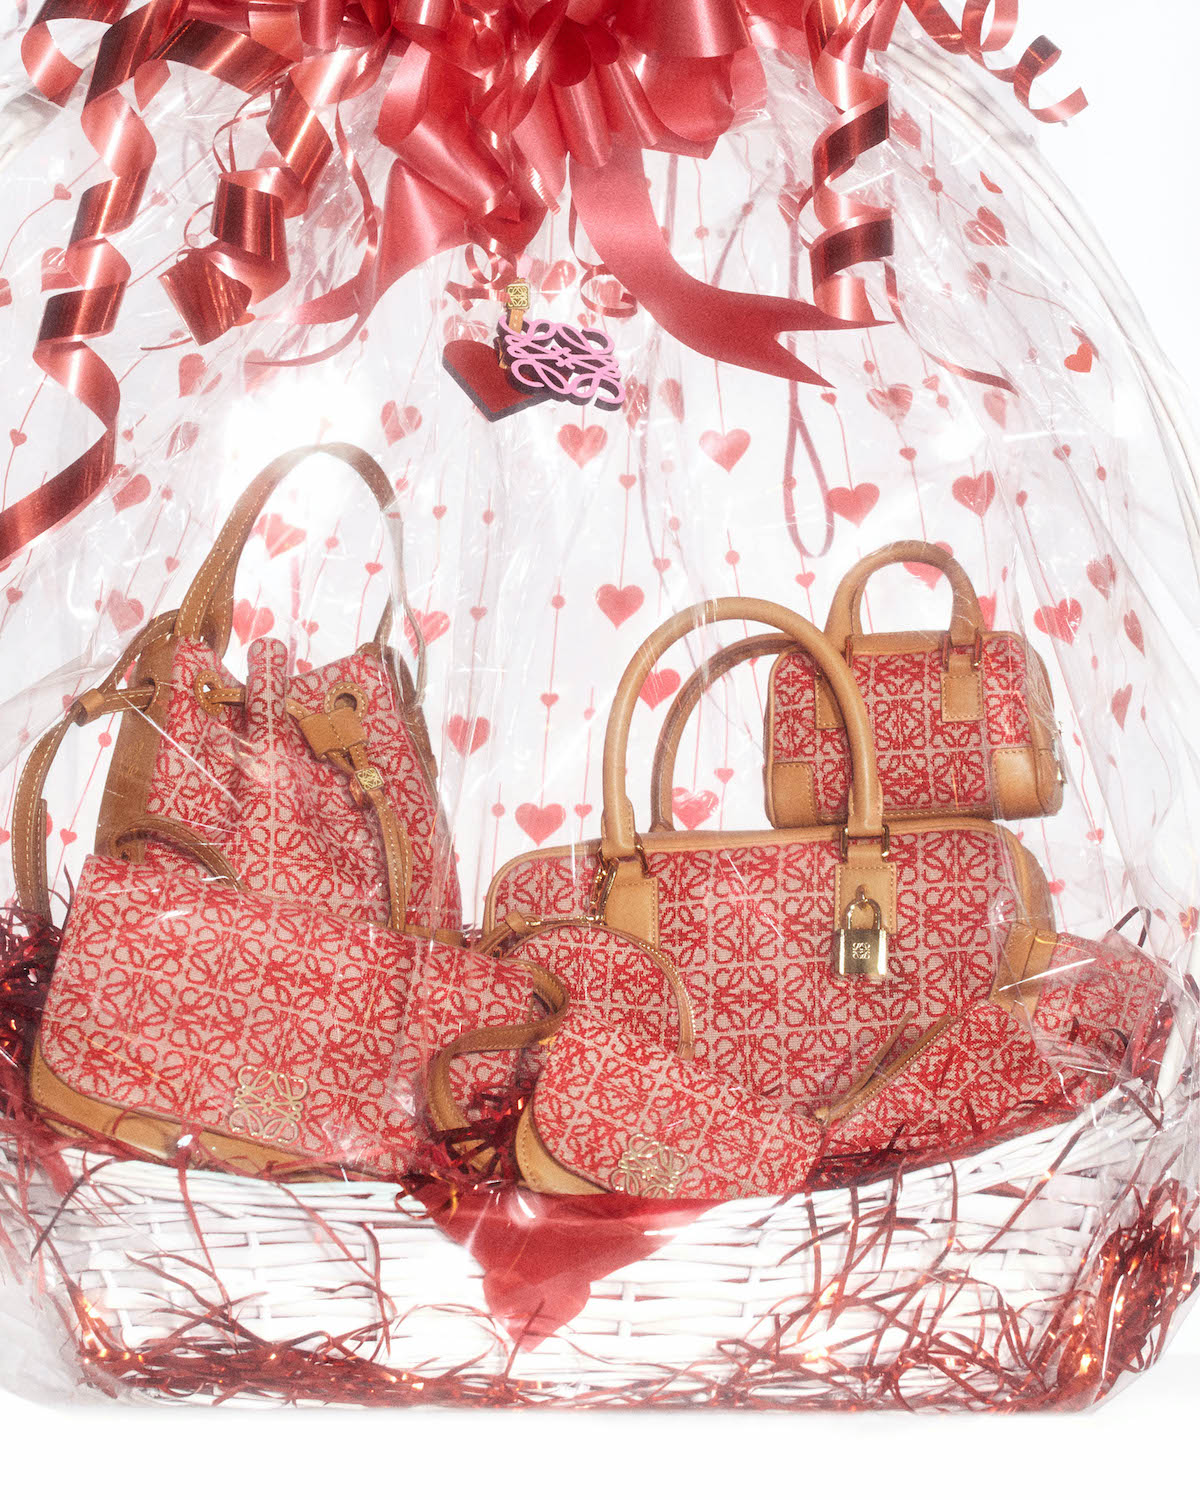 Loewe launches new collection for Valentine's Day this year - The Glass  Magazine